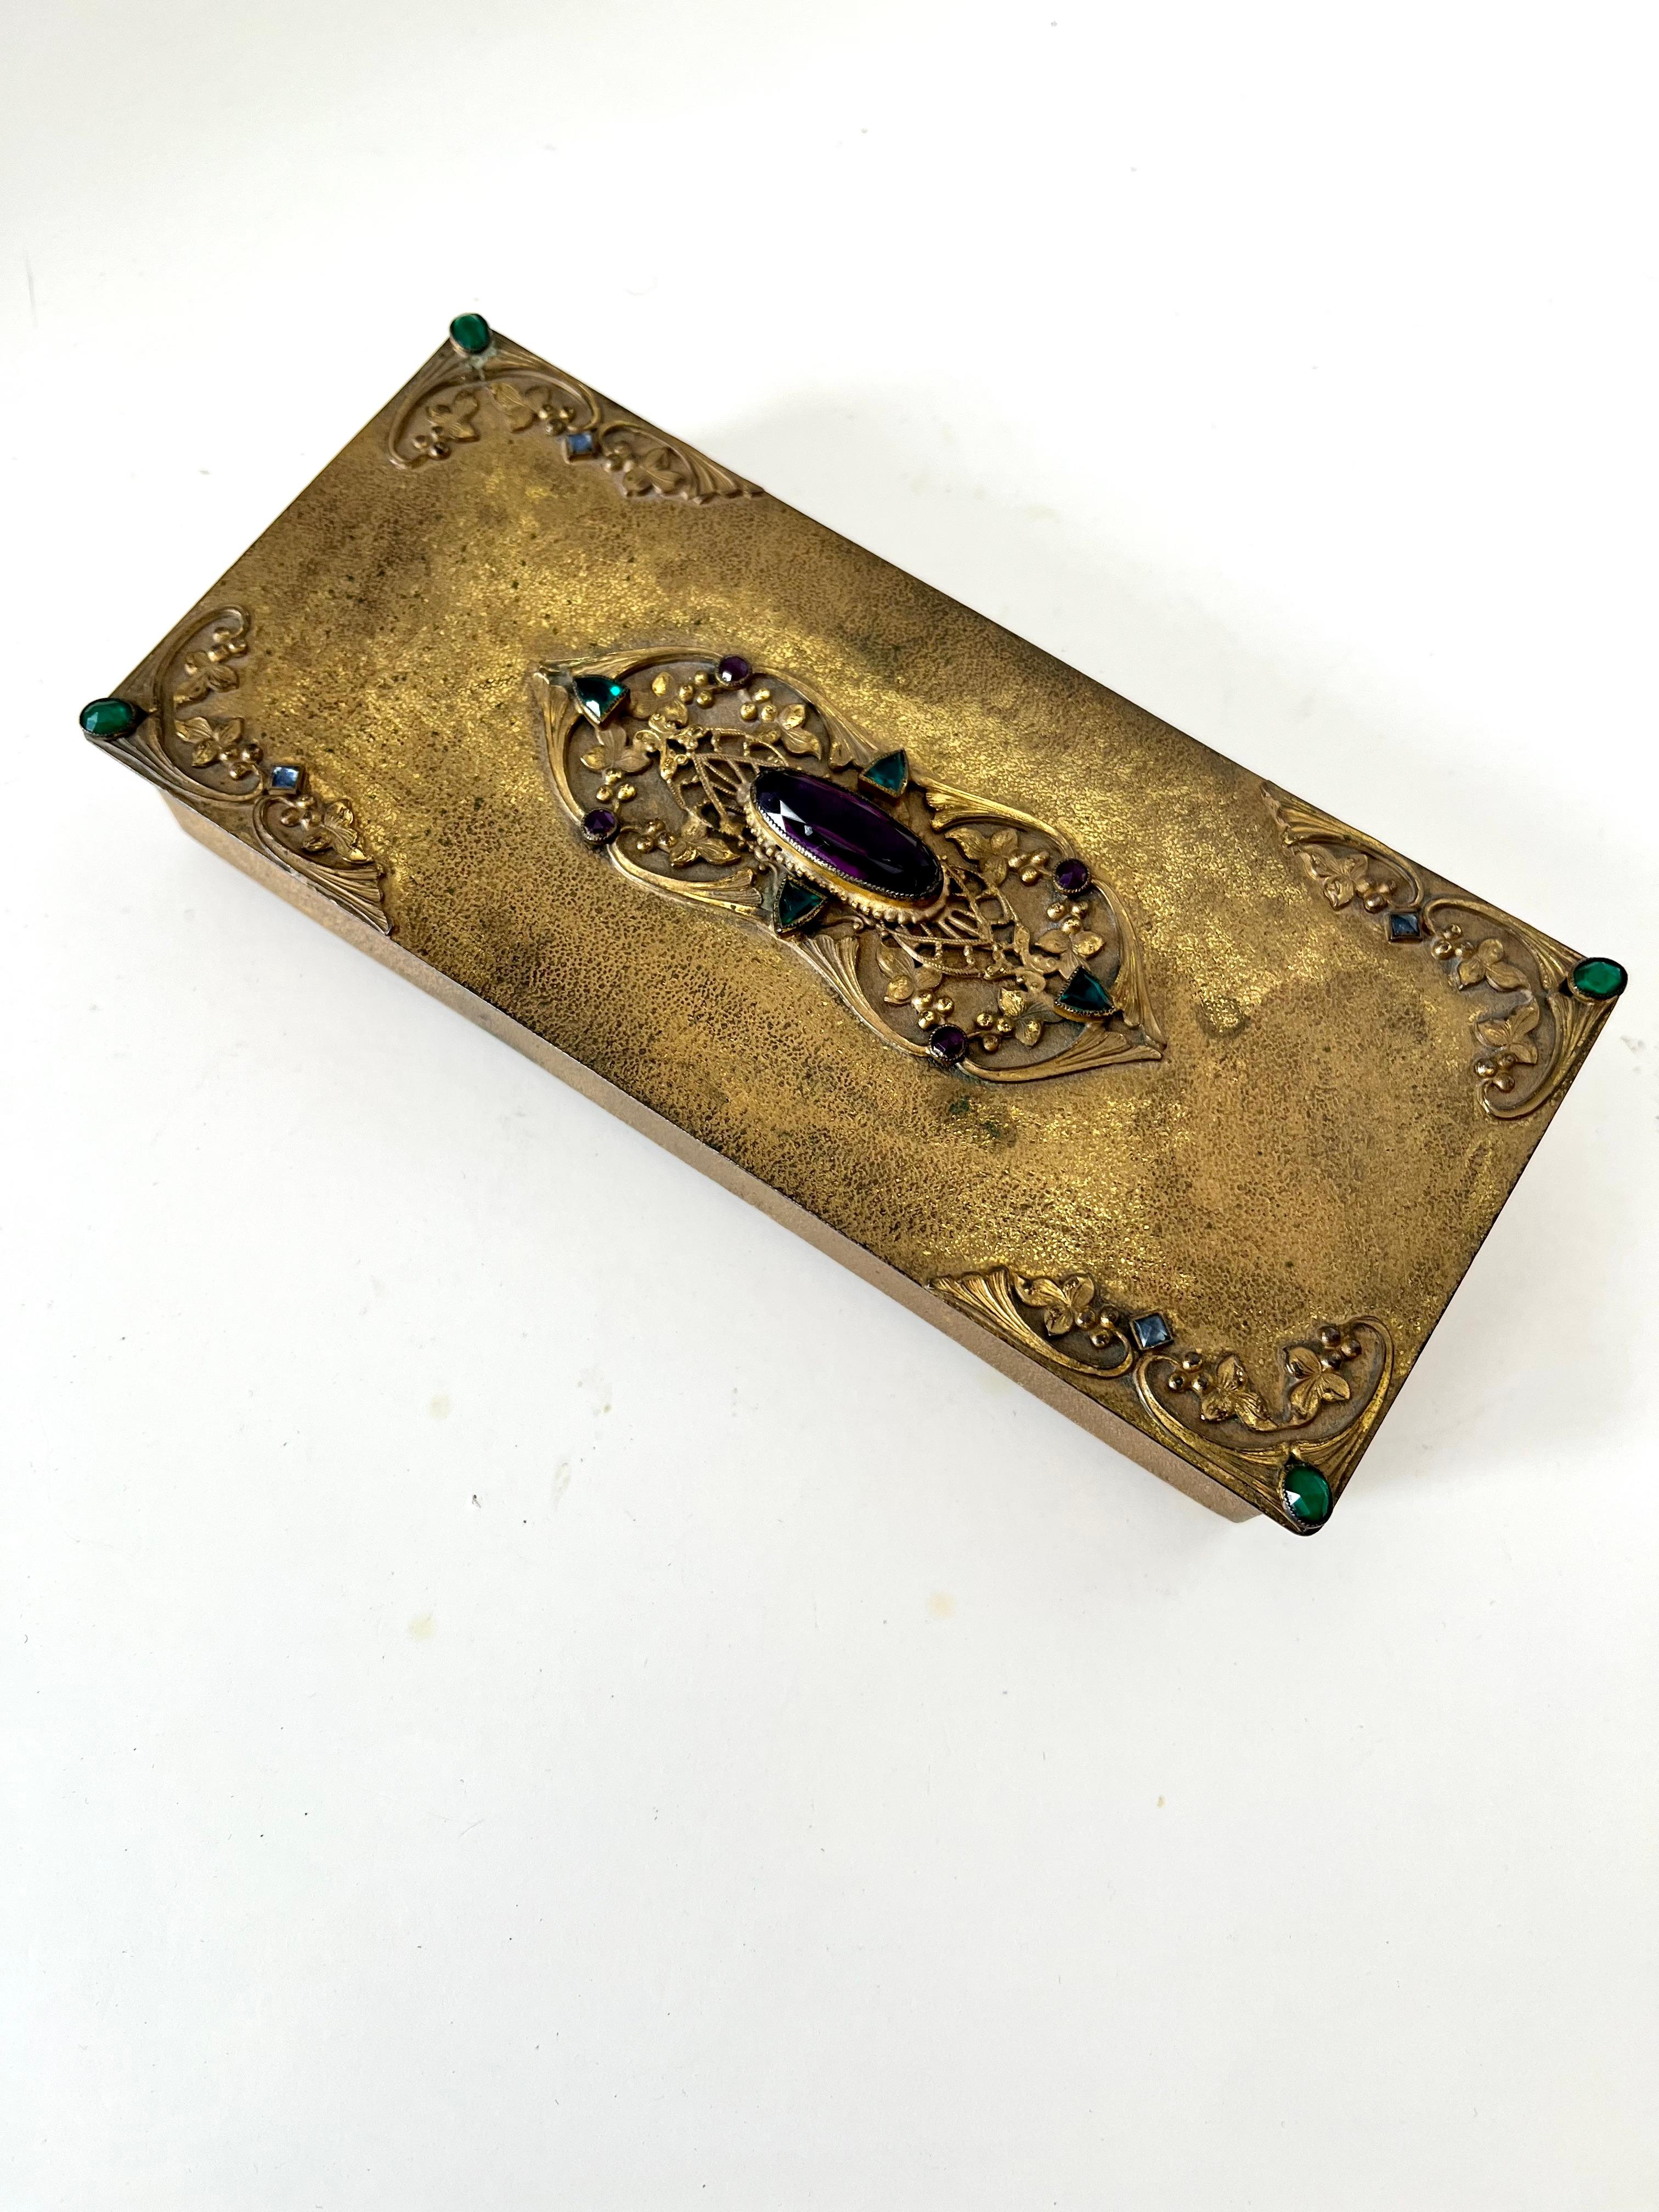 Hand-Crafted Empire Art Gold Box with Decorative hinged Lid and Jewels 1920 For Sale